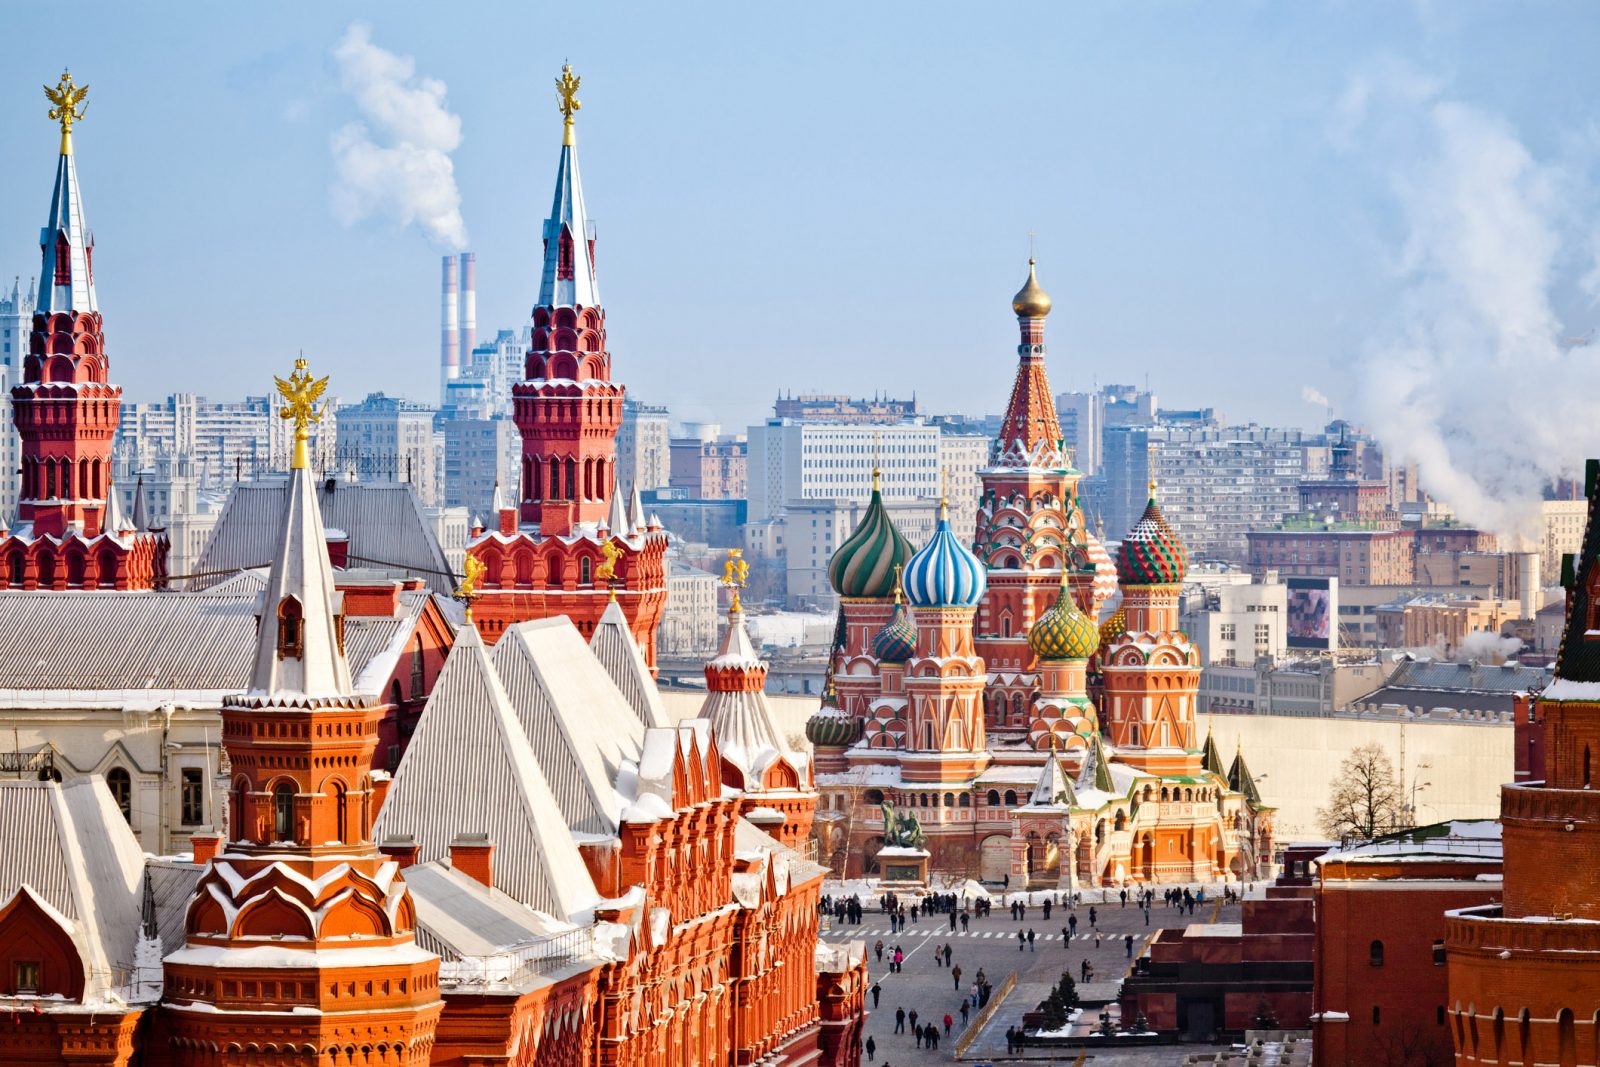 A rooftop view of the elaborate, ornamental buildings in Moscow, Russia.